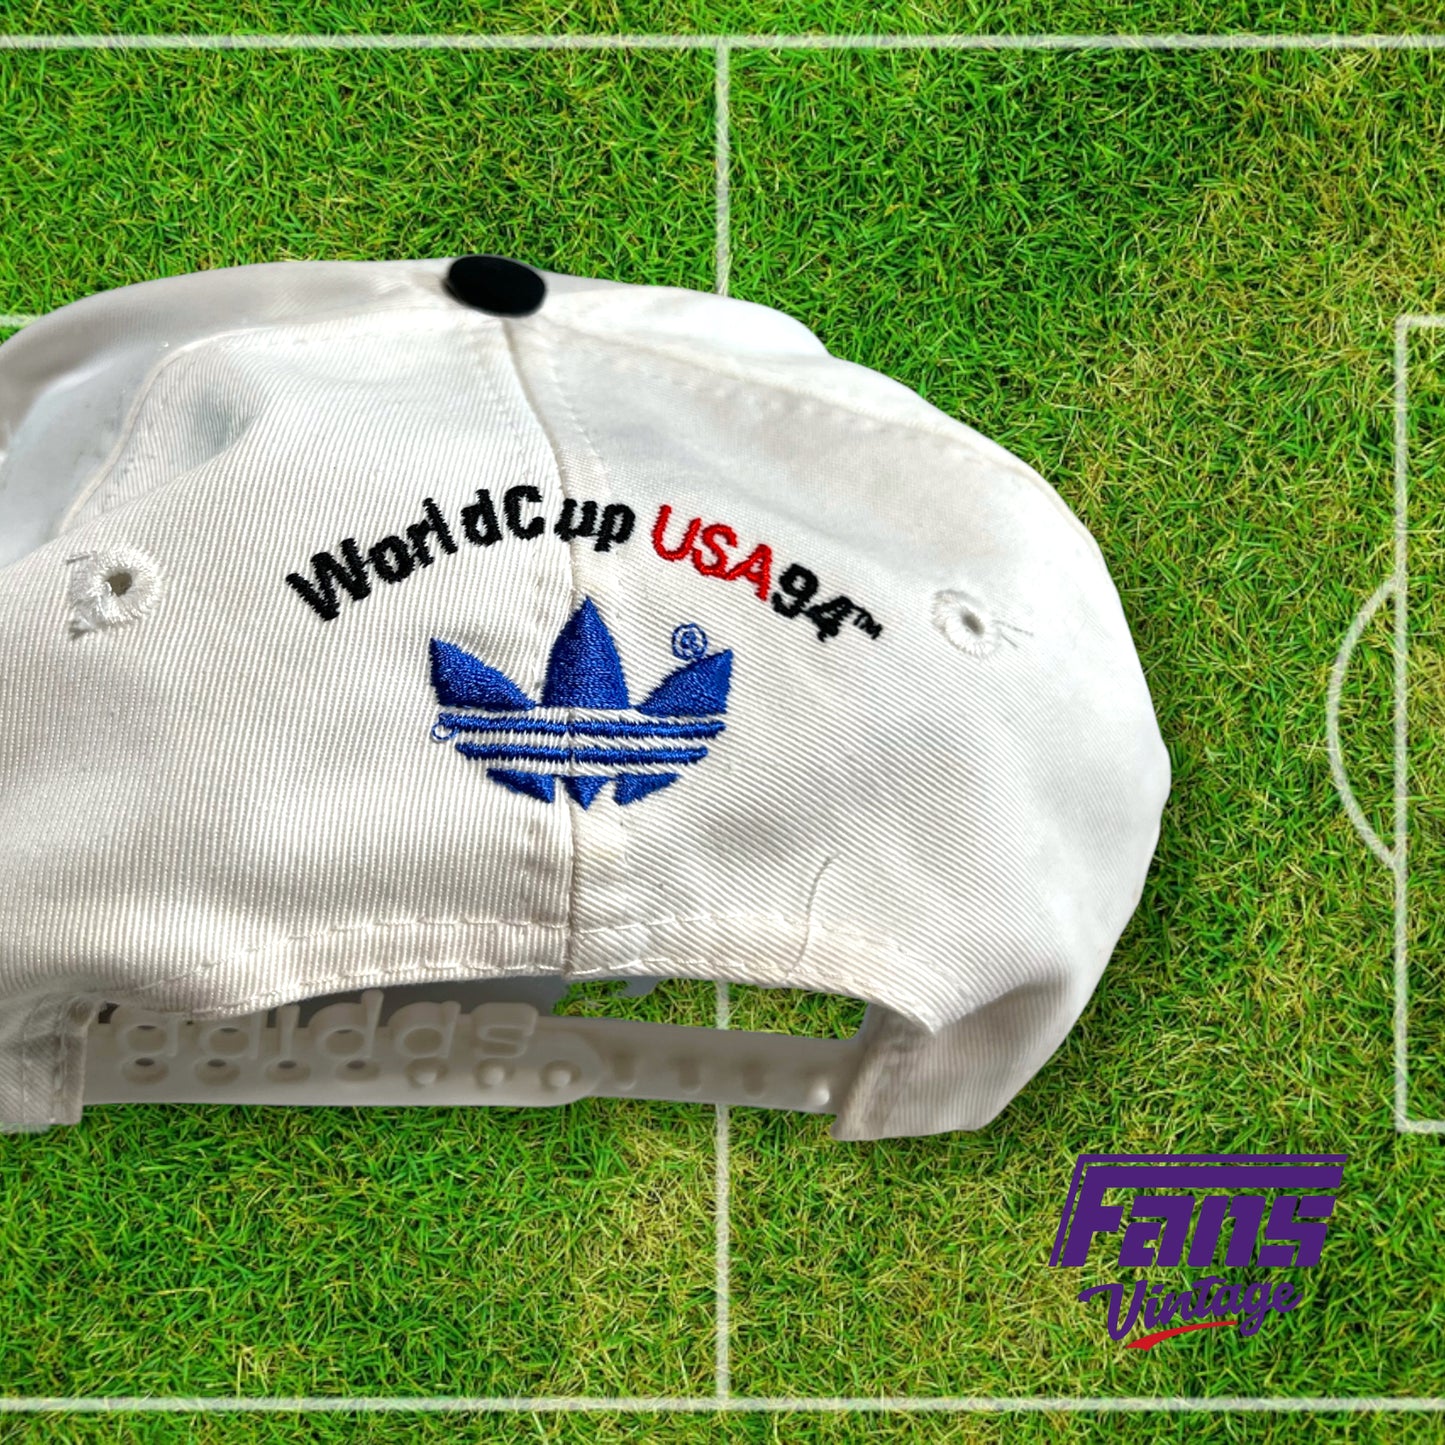 90s vintage Adidas World Cup snapback hat - New with tags!